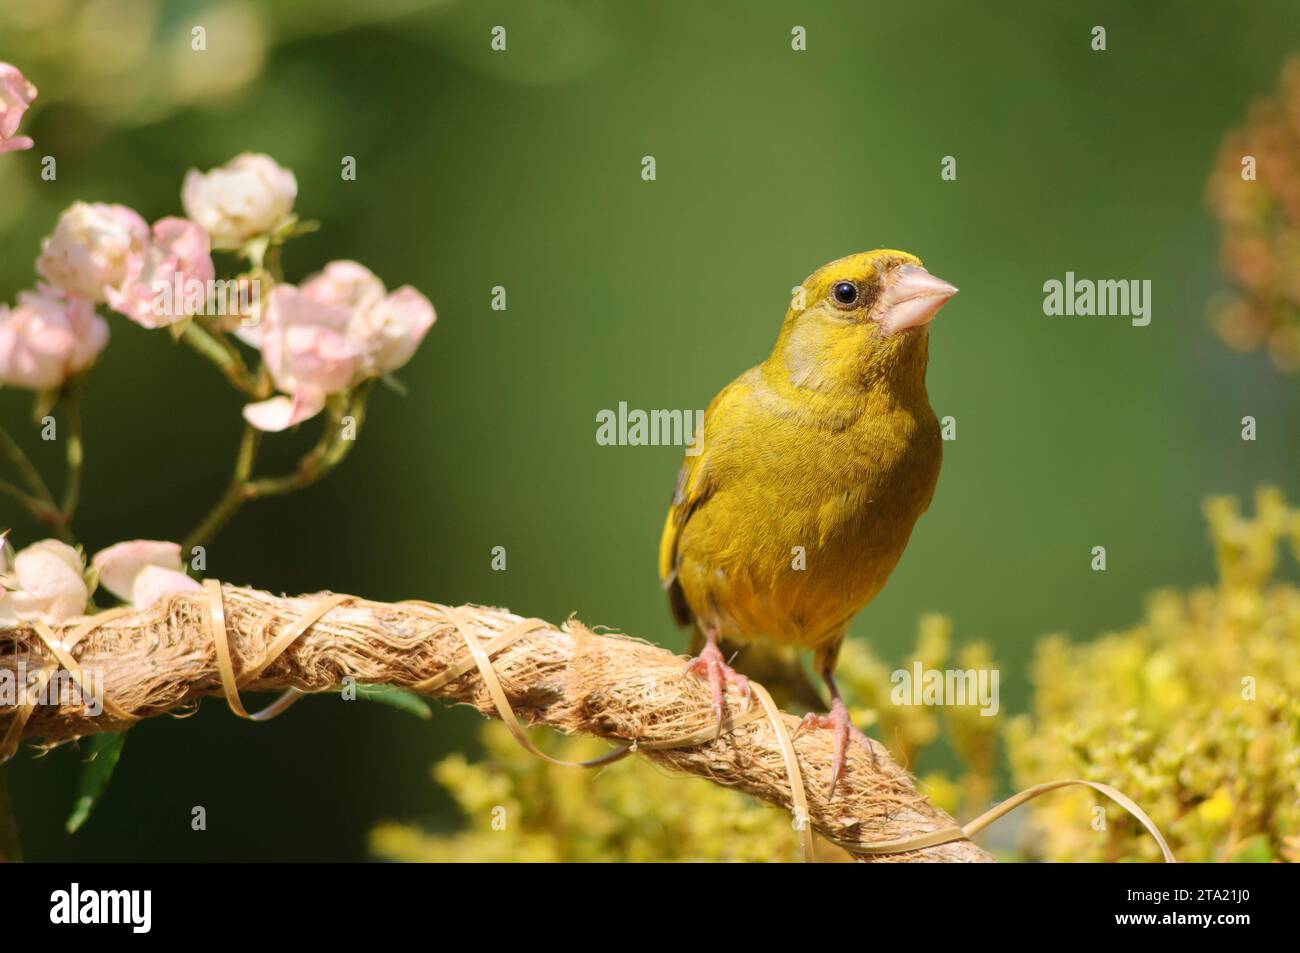 European greenfinch Carduelis chloris, male perched on basket handle in garden, County Durham, England, UK, August. Stock Photo